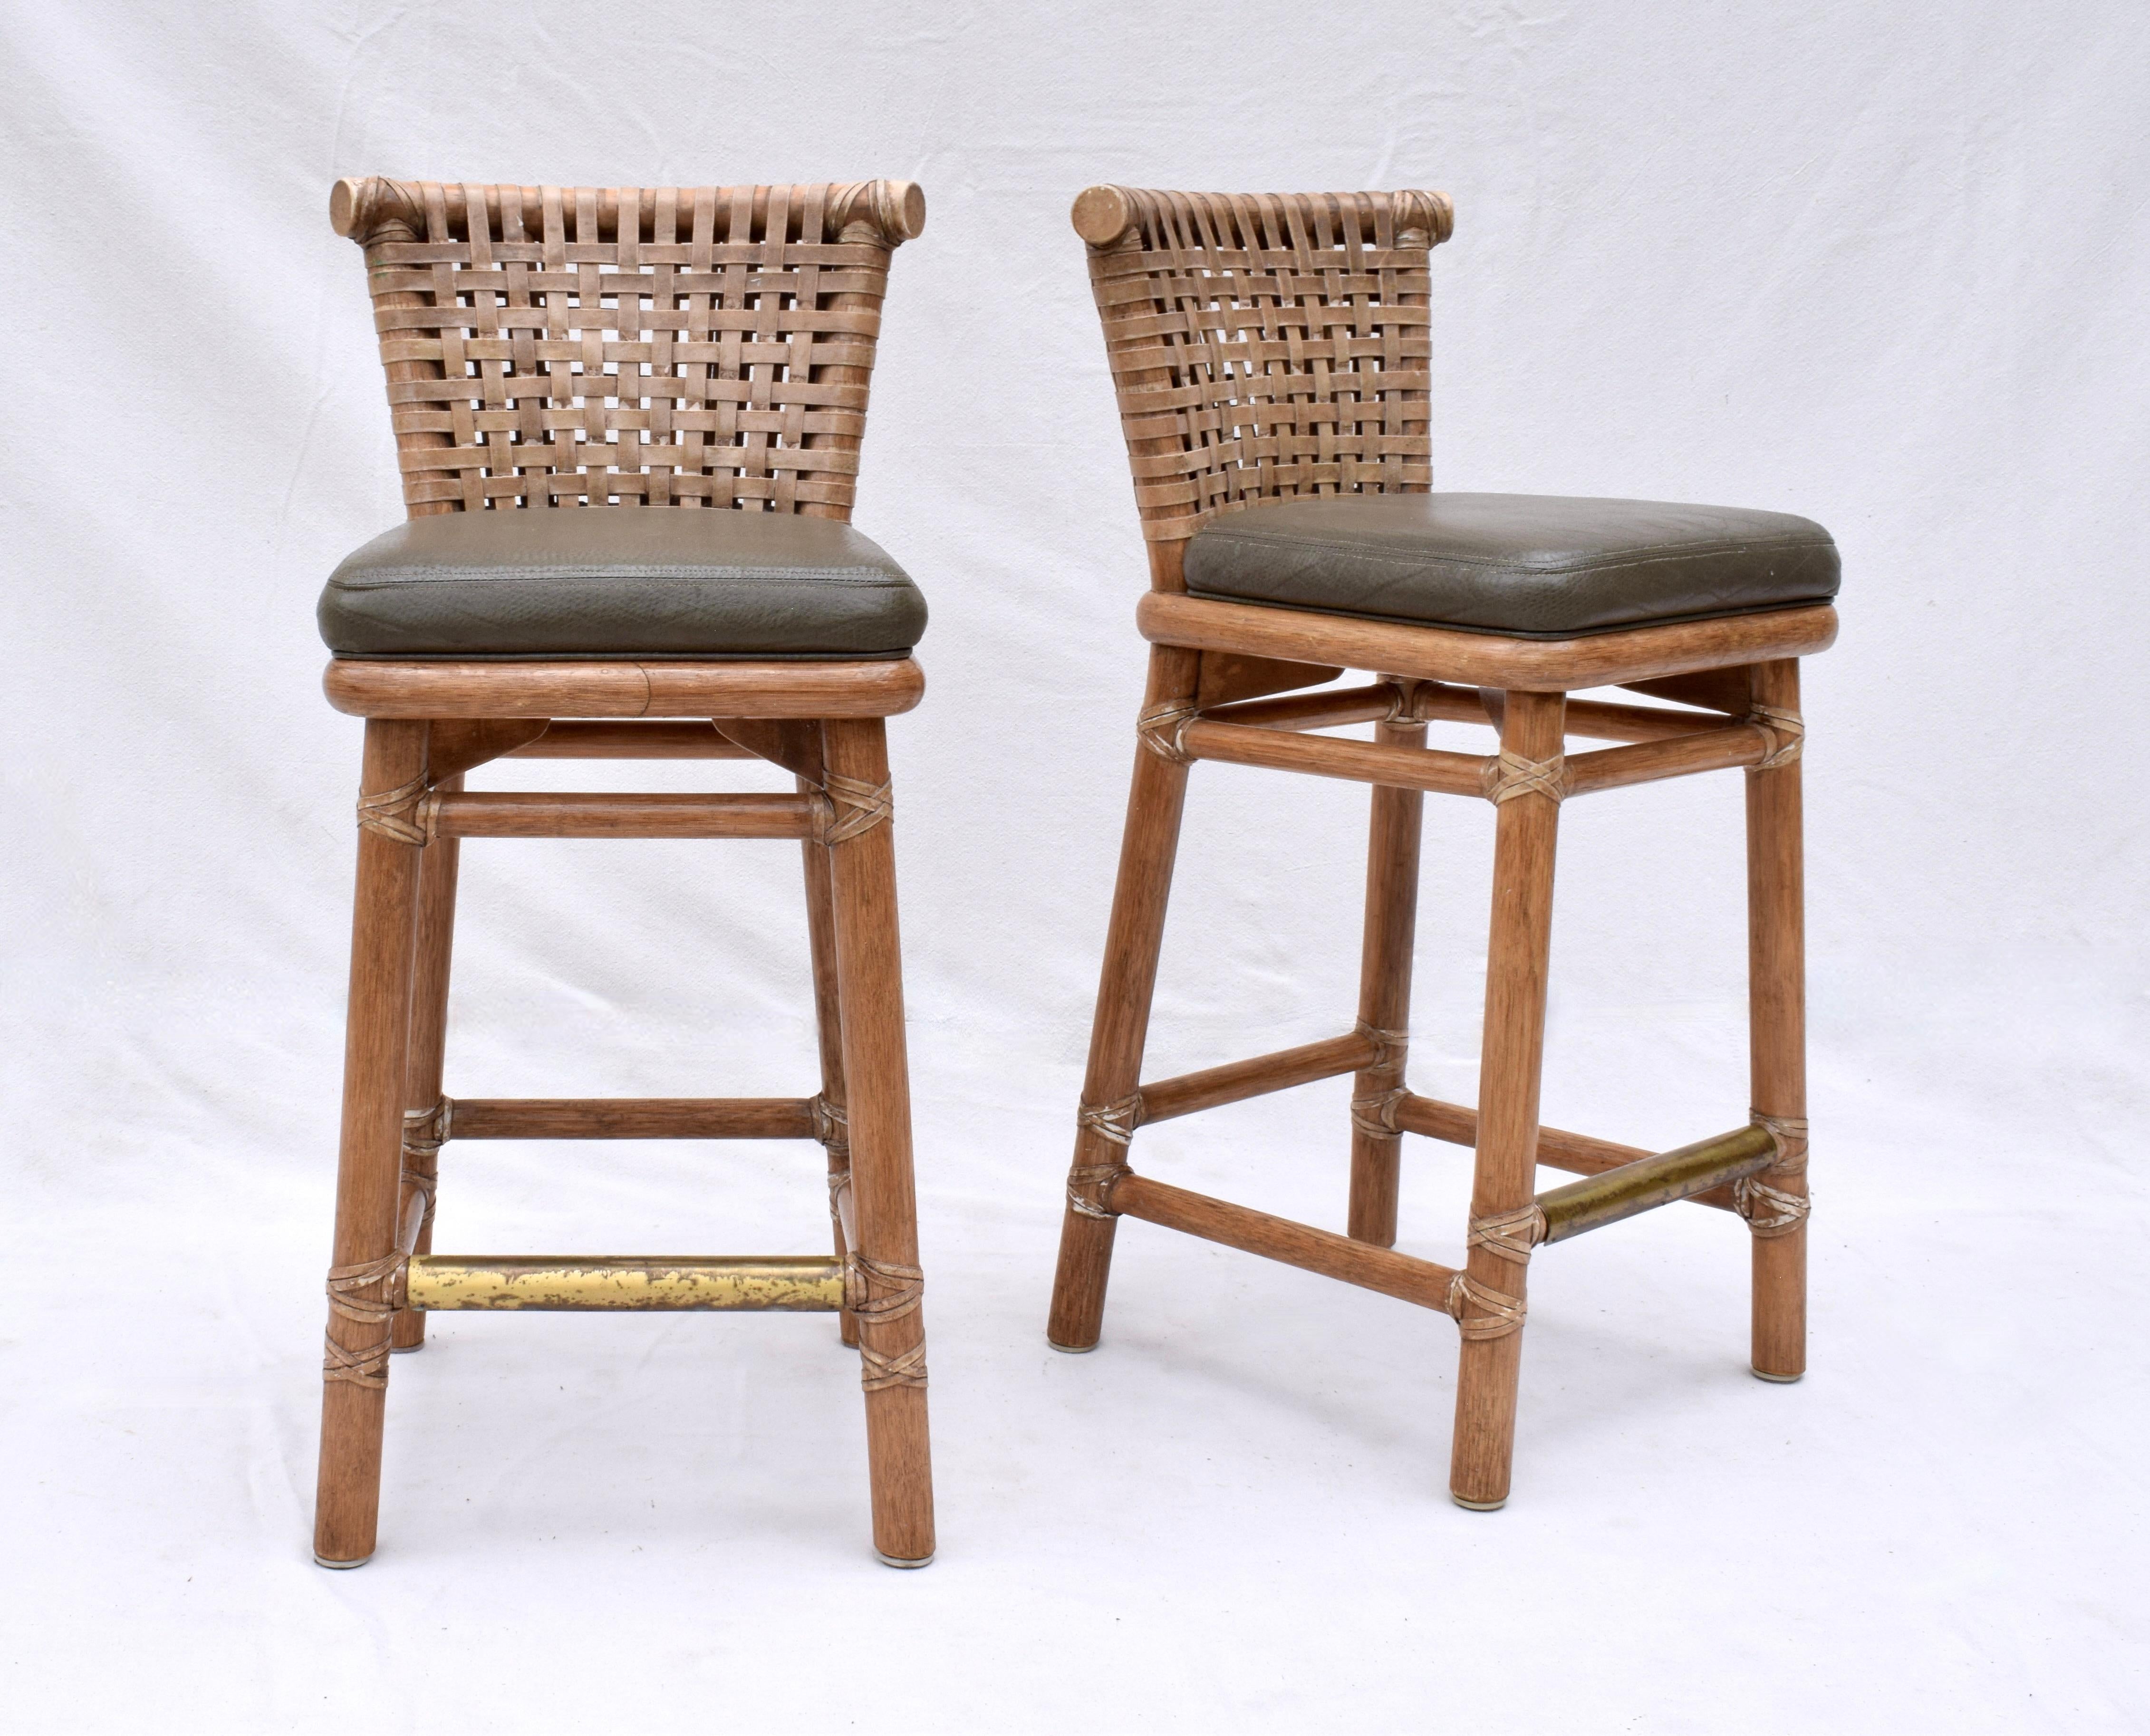 A pair of McGuire solid Oak barstools with leather seats, laced rawhide leather backs, subtly curved back rails and solid brass foot supports. These vintage beauties are quite substantial in weight & quality. Each chair has original McGuire San